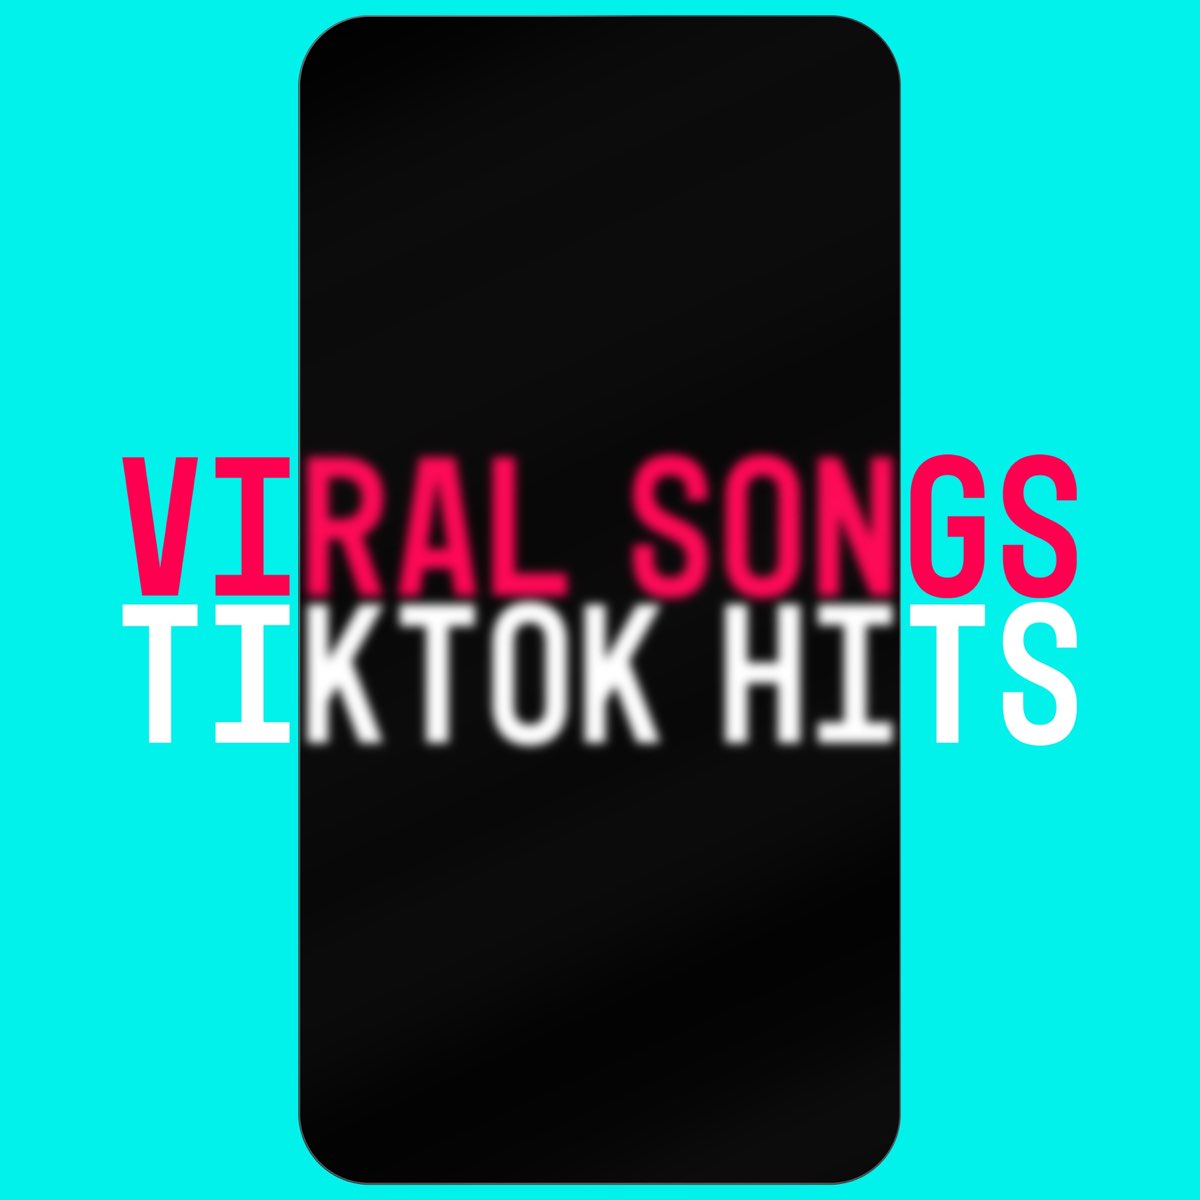 ‎Viral Songs TikTok Hits 2022 2023 by Various Artists on Apple Music